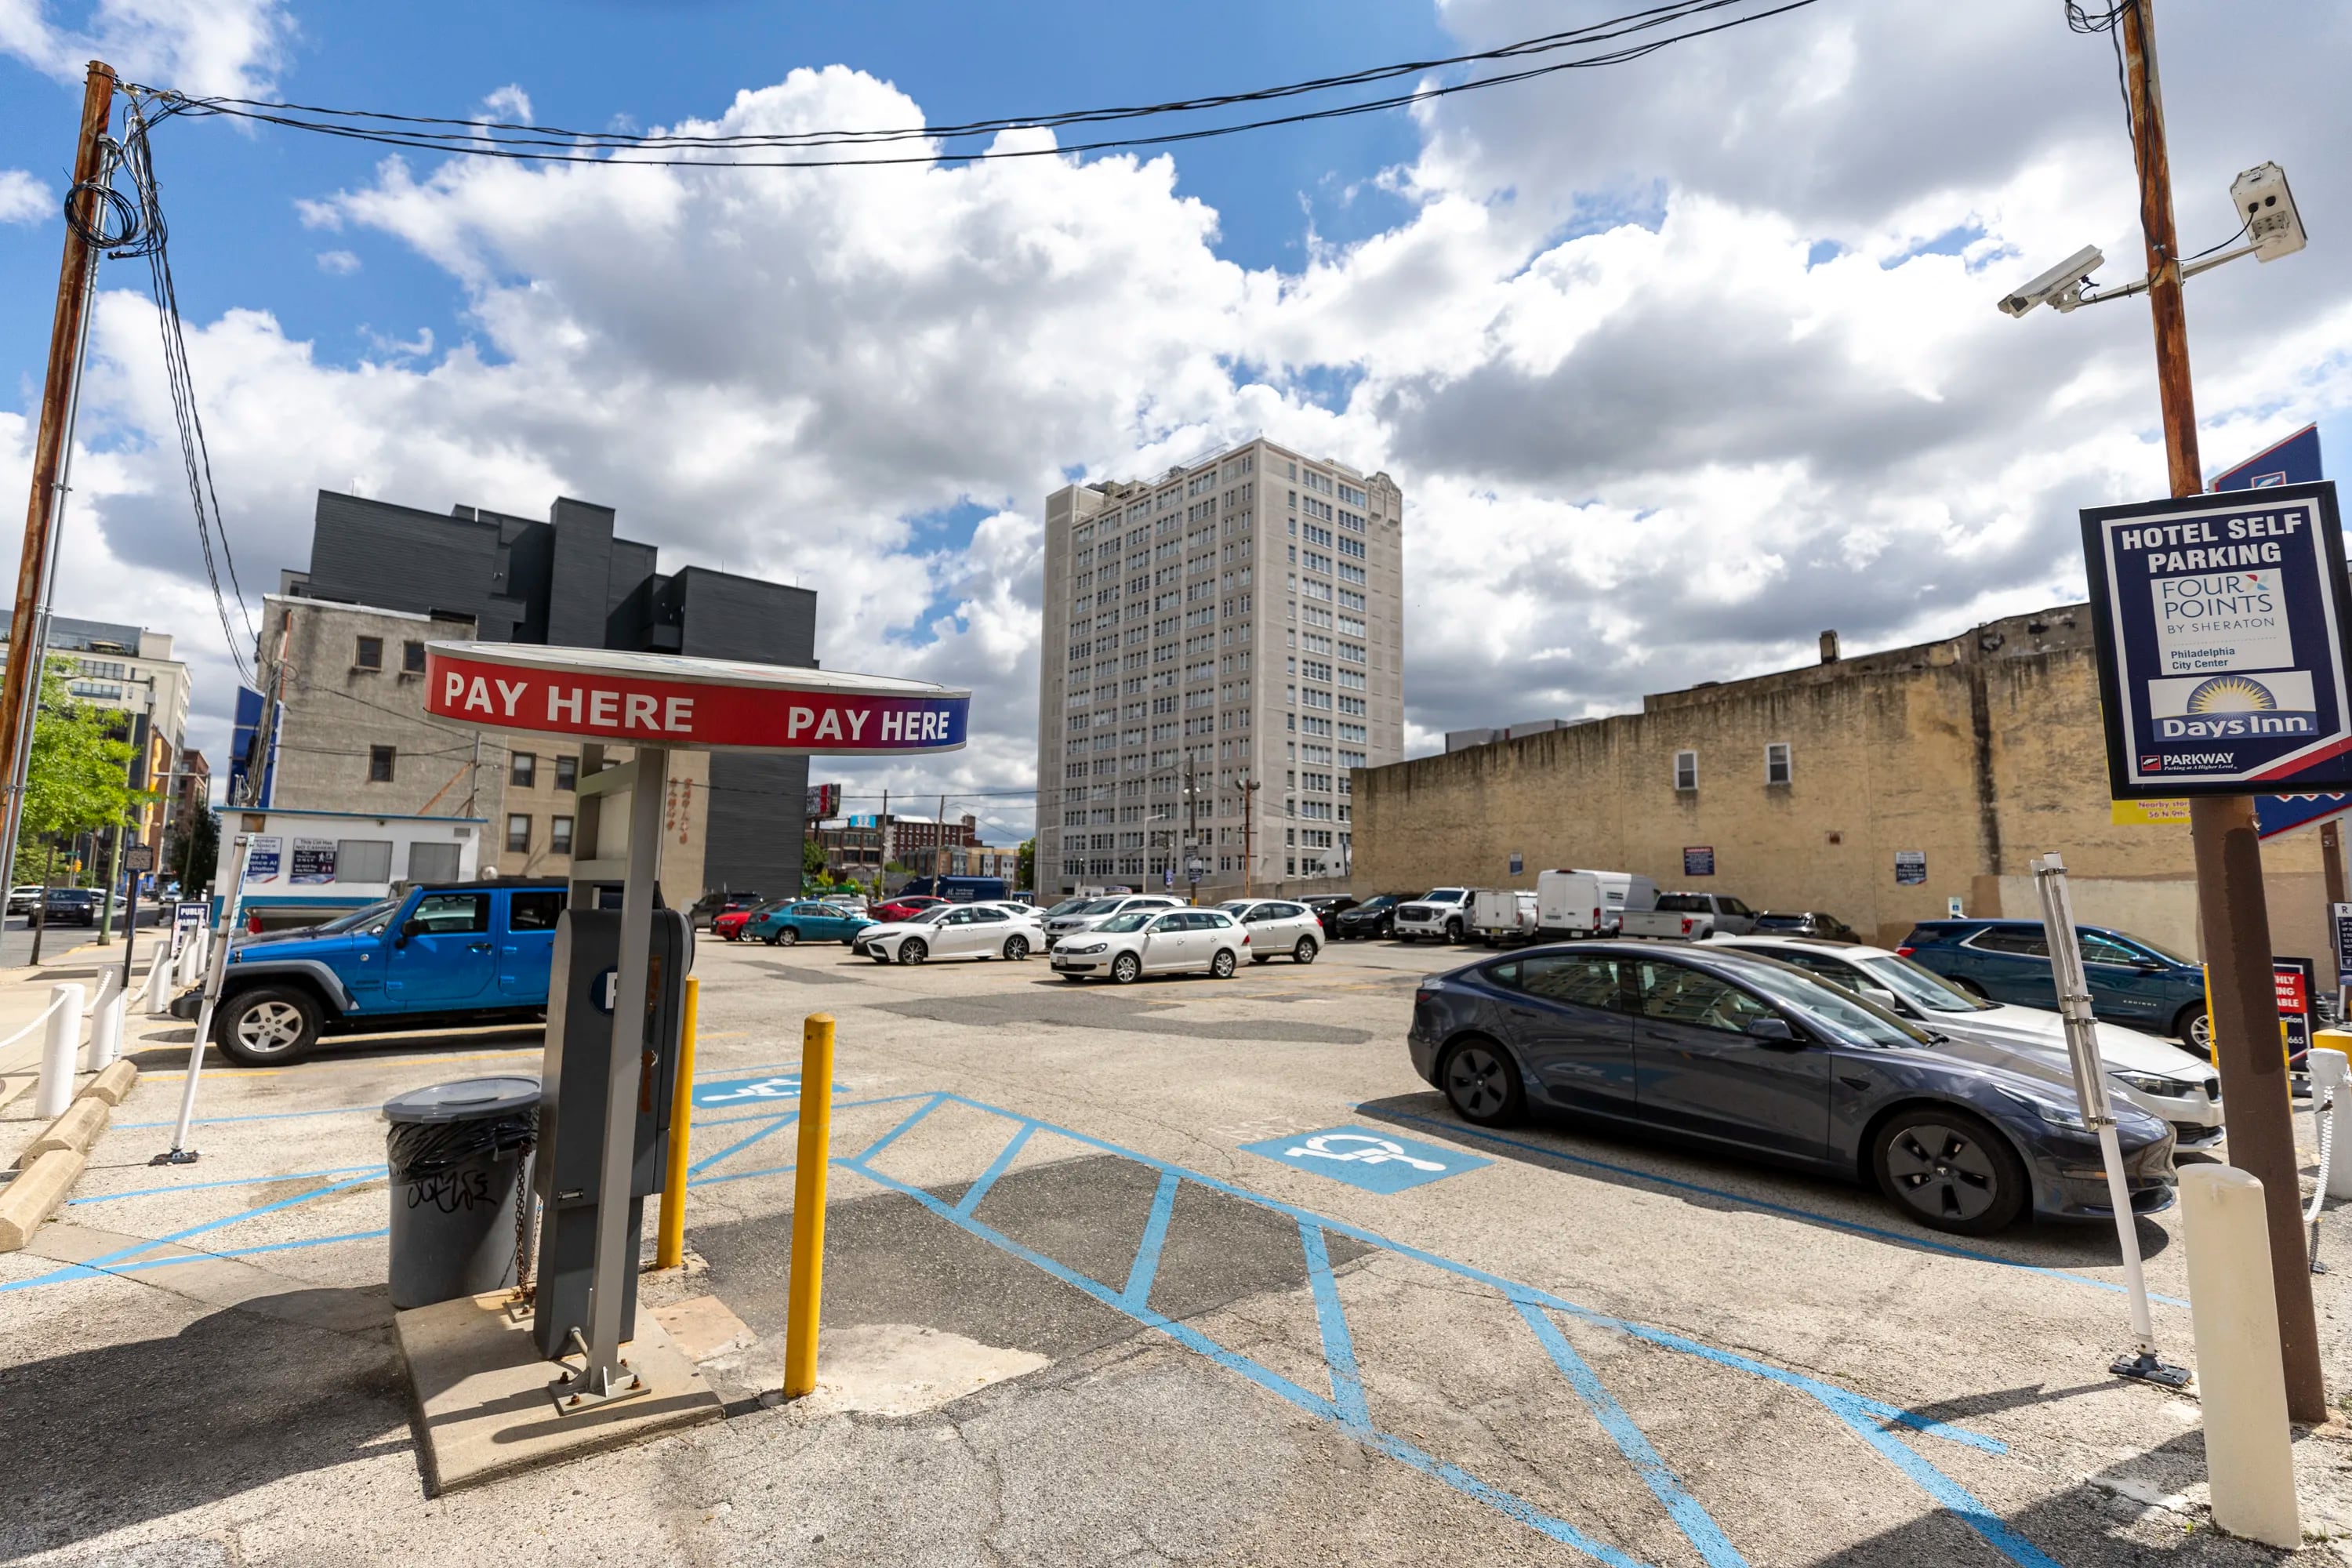 Because the large surface lot owned by Parkway Corp. at 12th and Race Streets is close to highway ramps, intercity buses could minimize the amount of time they spend traveling on city streets.